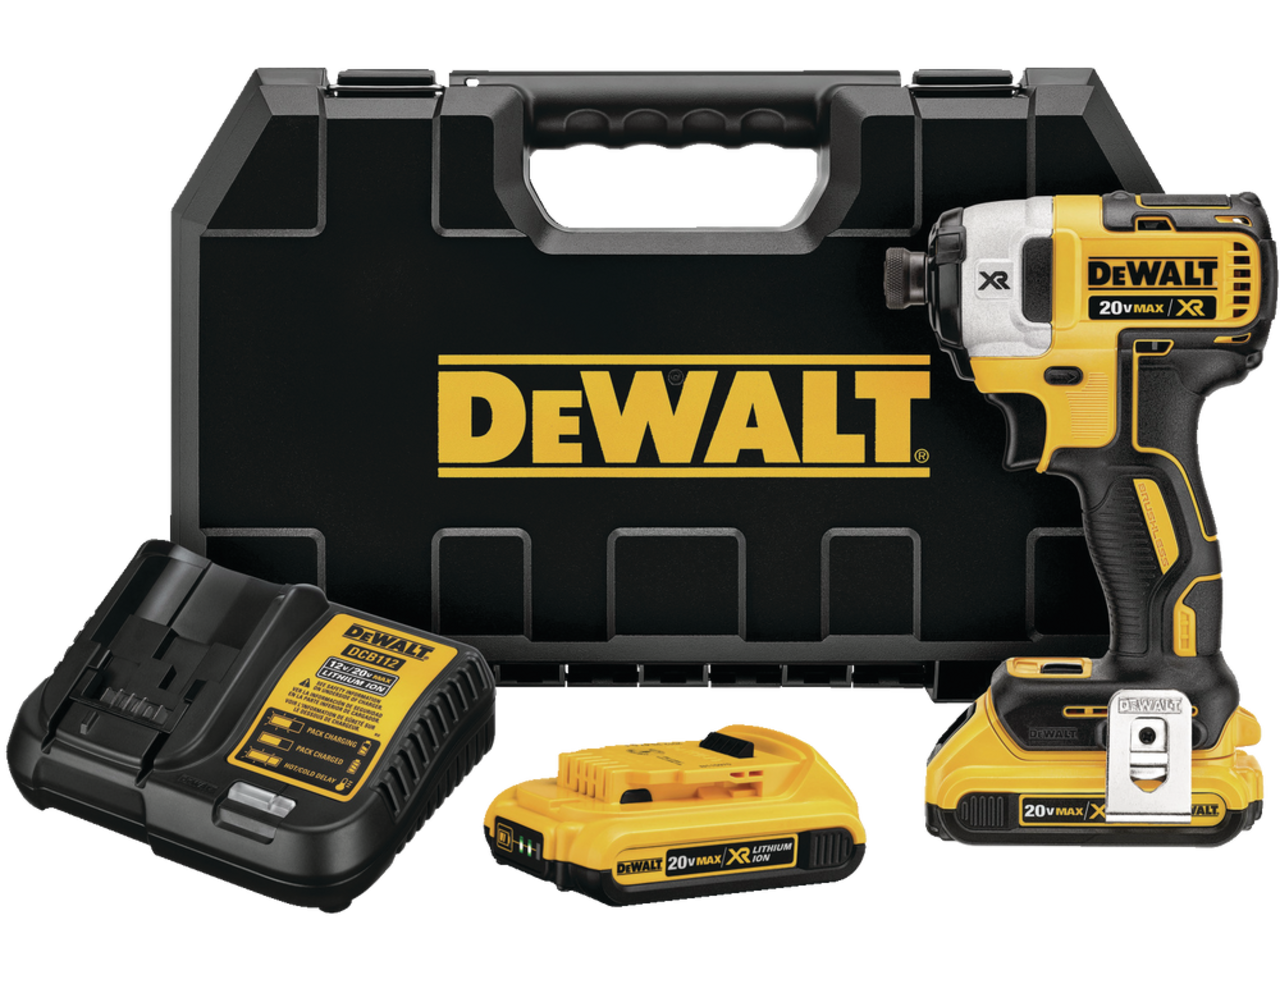 https://media-www.canadiantire.ca/product/fixing/tools/portable-power-tools/0543243/dewalt-20v-brushless-impact-driver-59575c1c-6298-428e-82ce-326d78cfebcf.png?imdensity=1&imwidth=640&impolicy=mZoom